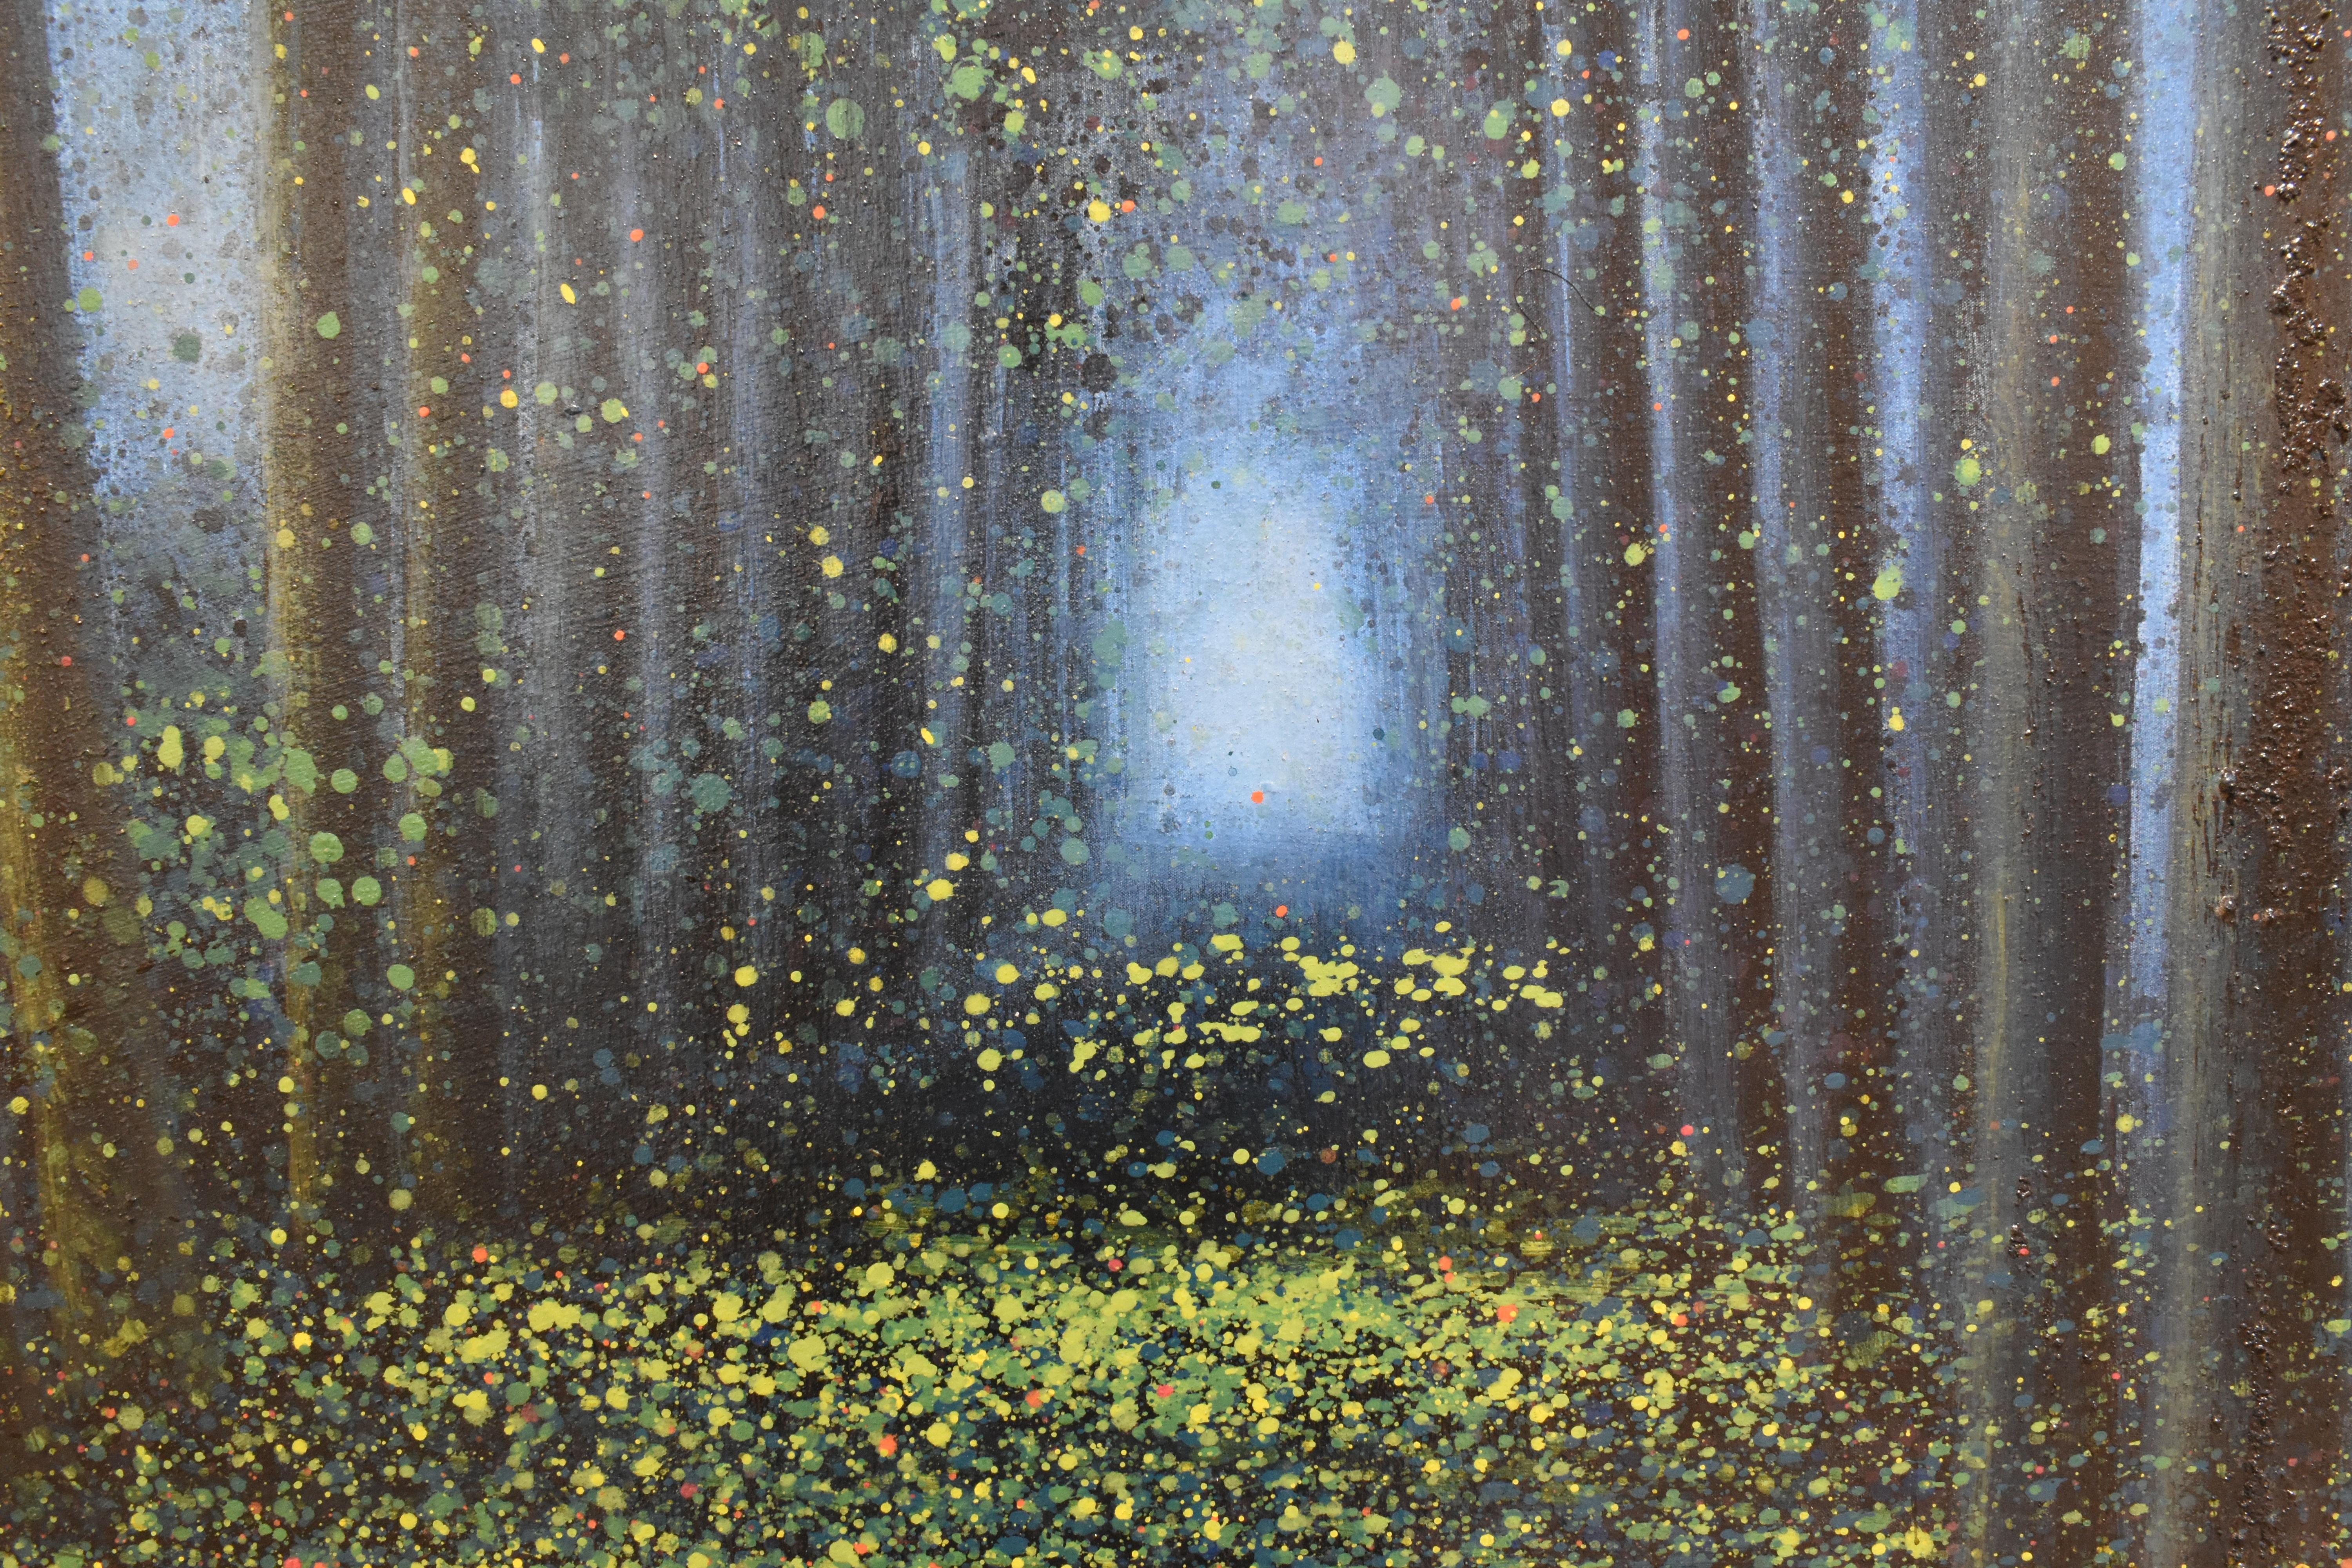  Forest walk to calm the soul - Pointillism tLandscape by the Thailand artist - Painting by Narate Kathong